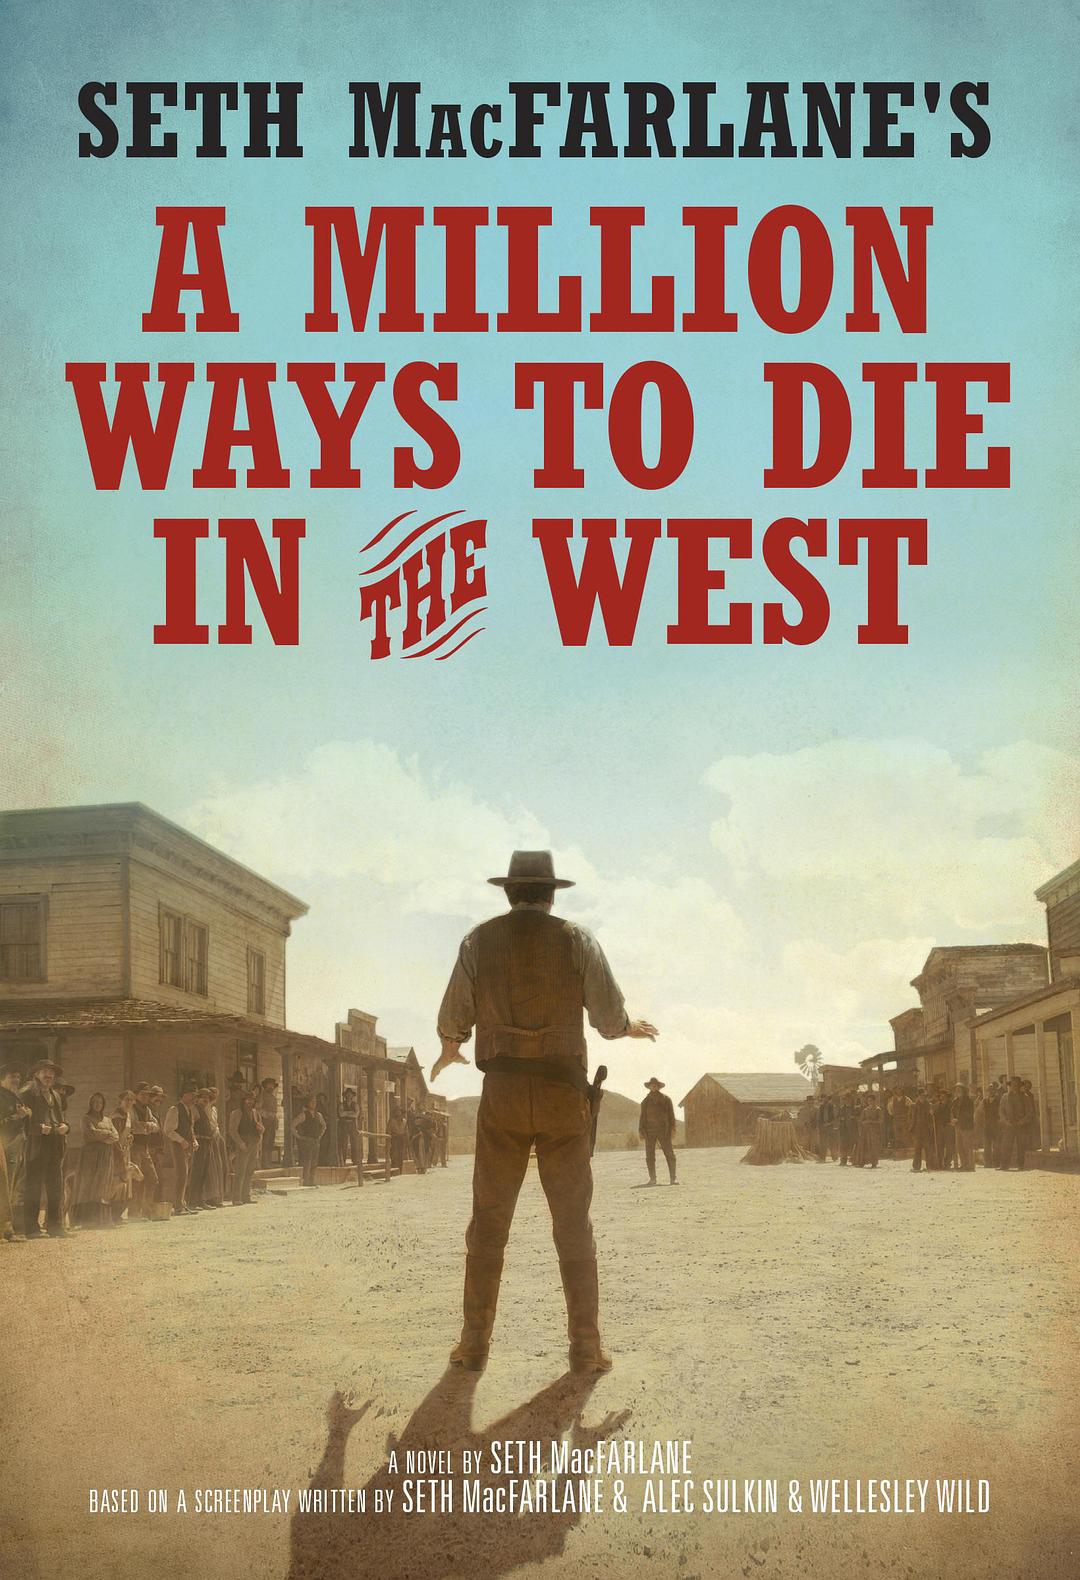 һַʽ/ A.Million.Ways.to.Die.in.the.West.2014.EXTENDED.CUT.1080p.BluRay-1.jpeg